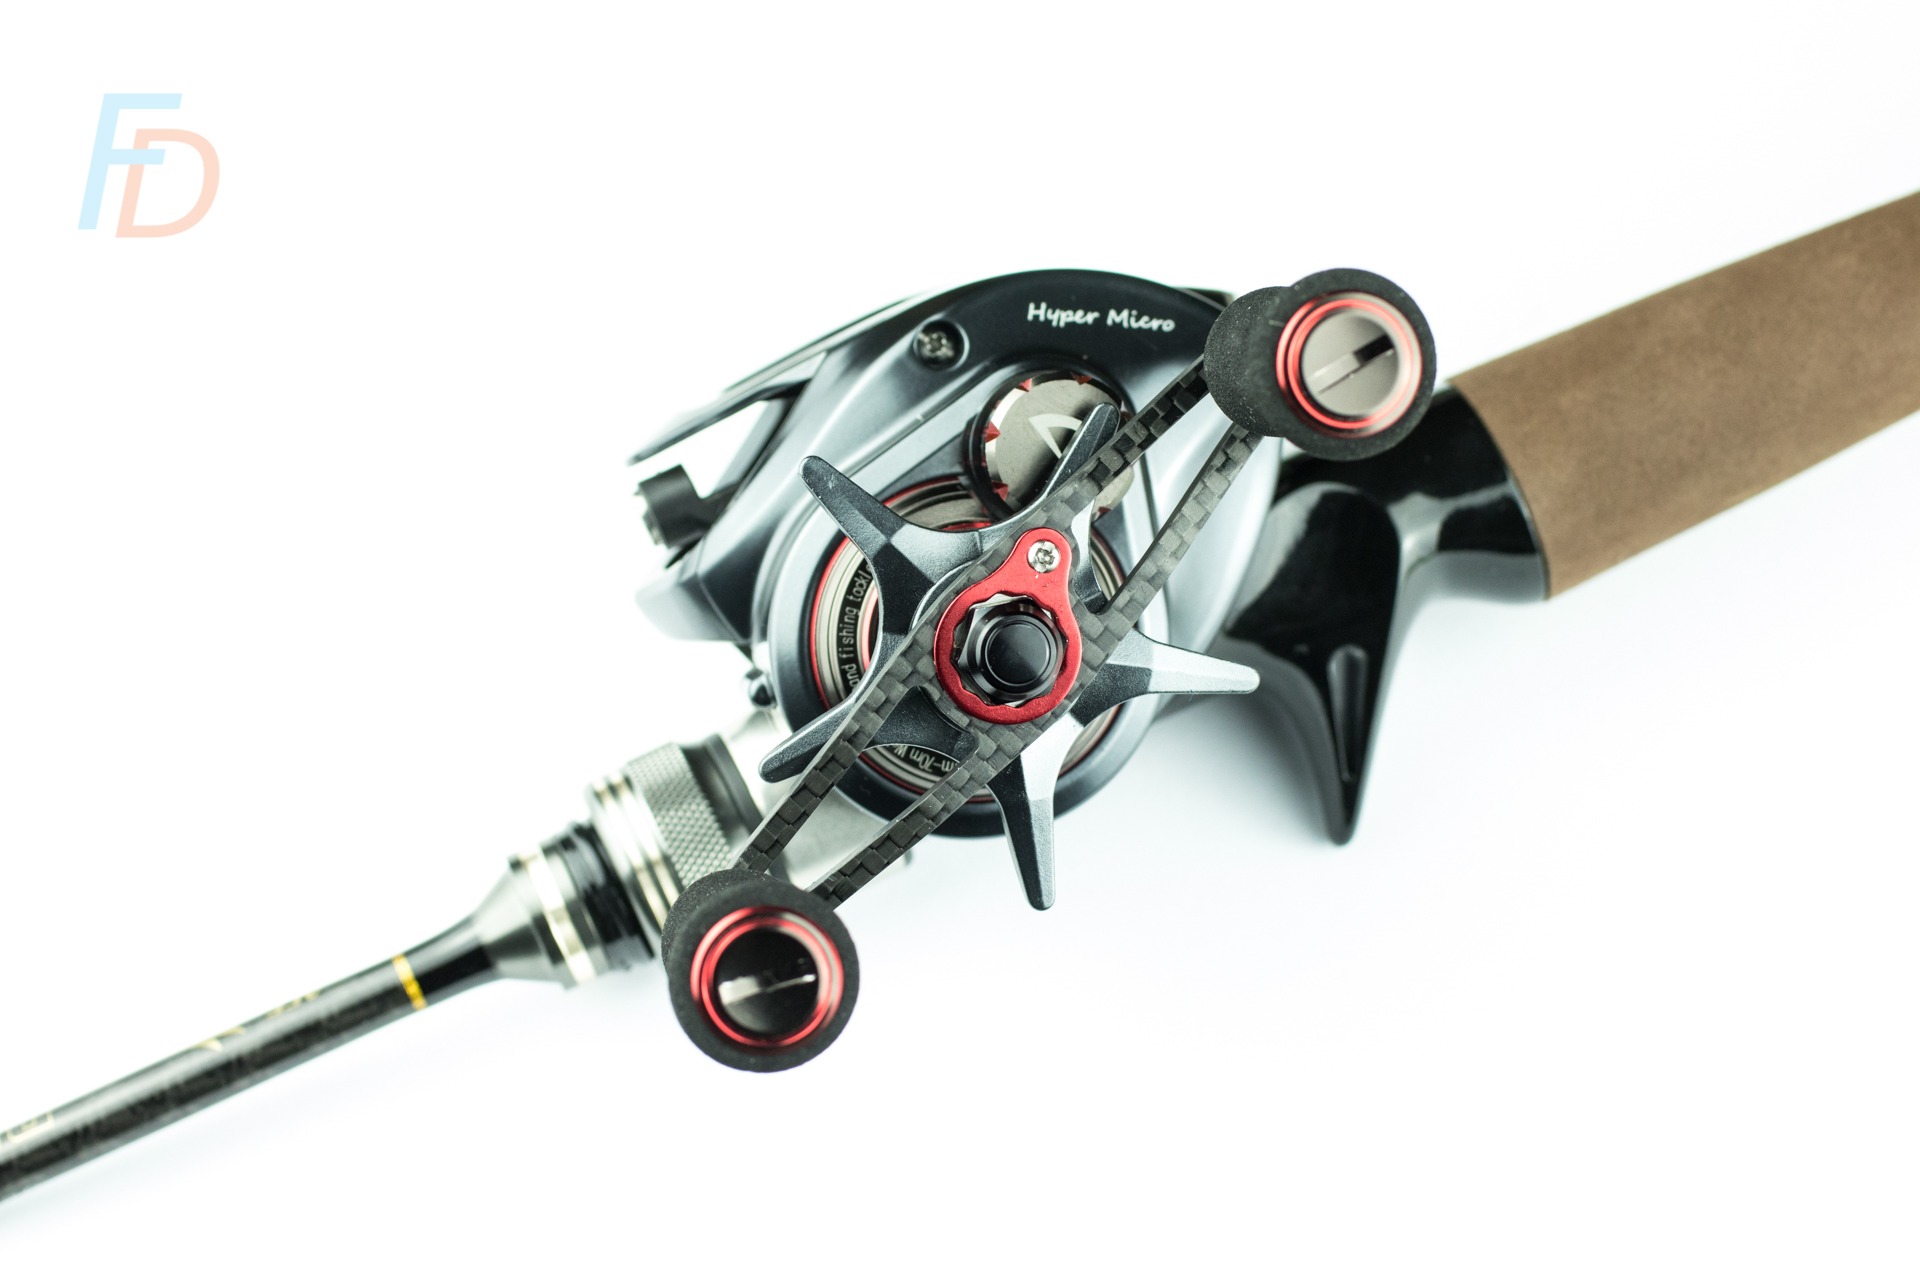 Beginner question: Is this a bait caster or spinning rod? : r/Fishing